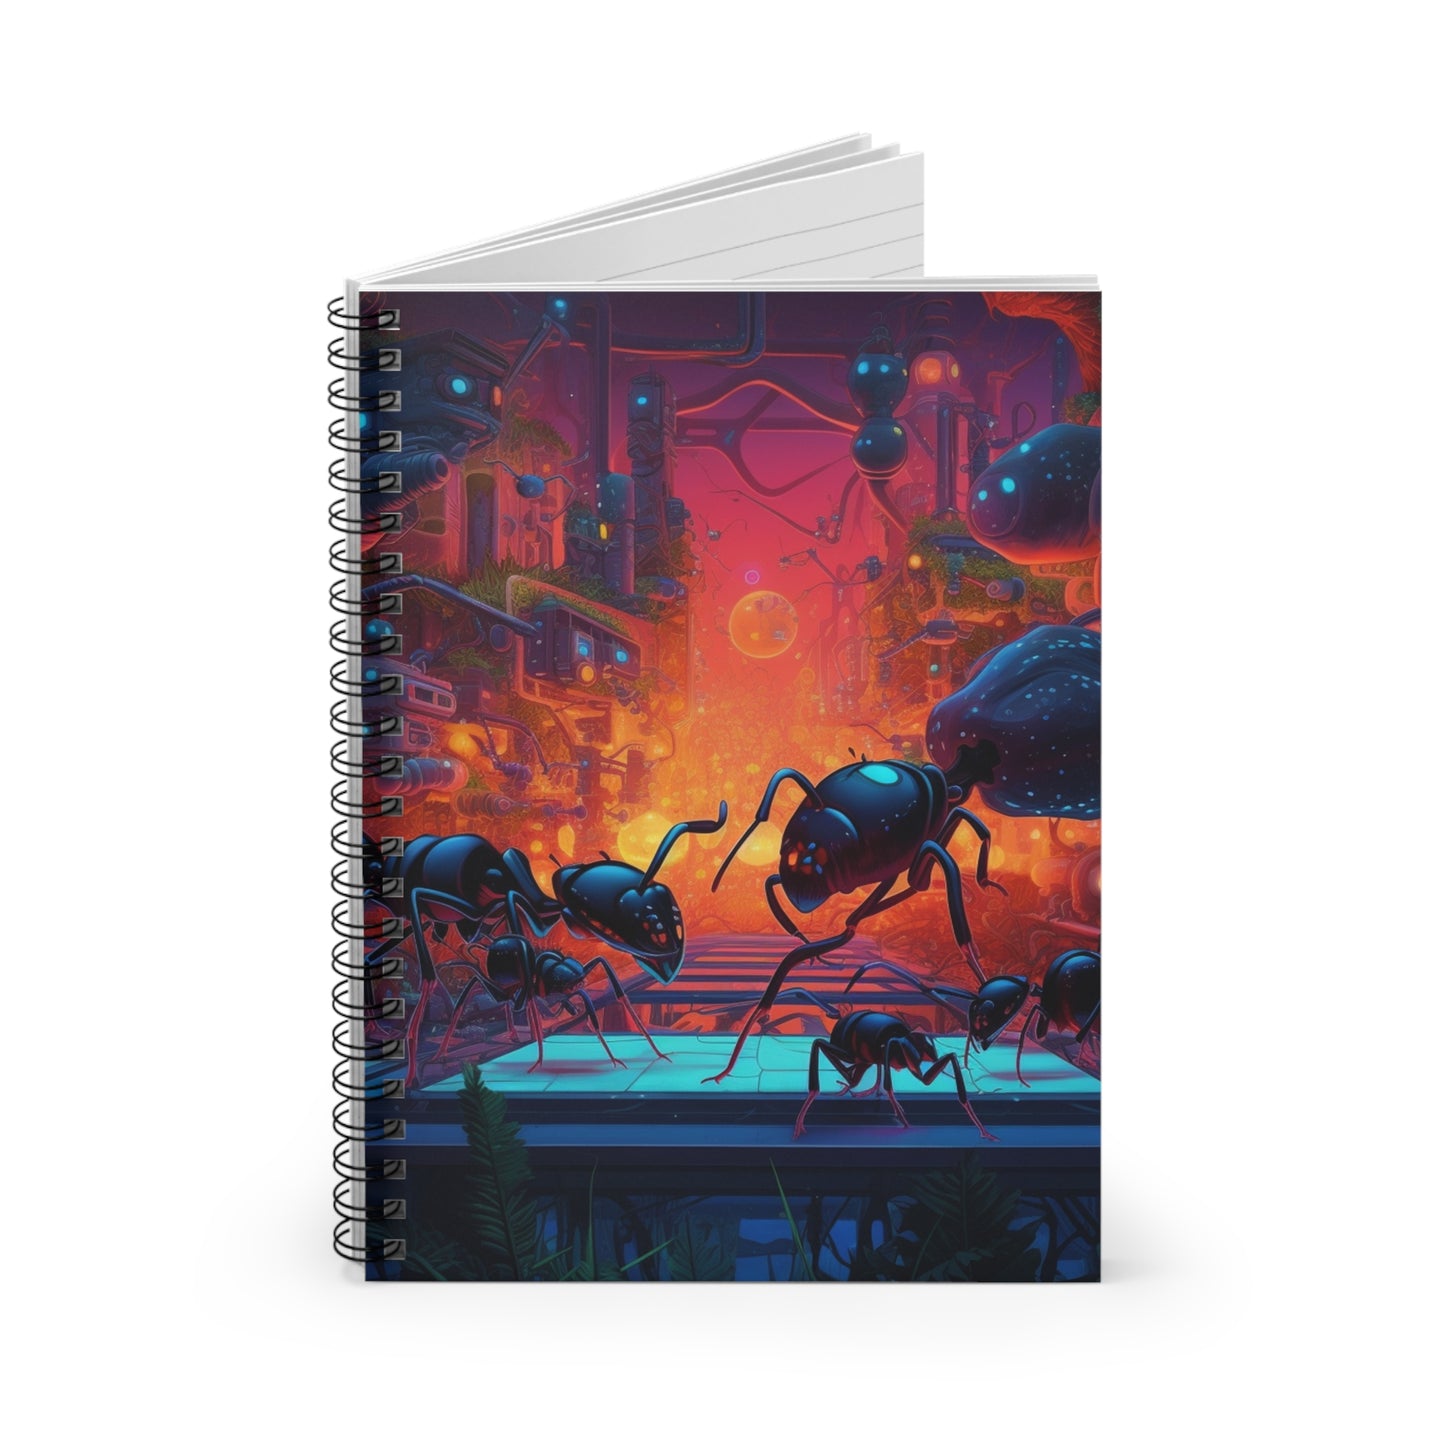 Spiral Notebook - Ruled Line Ants Home 2